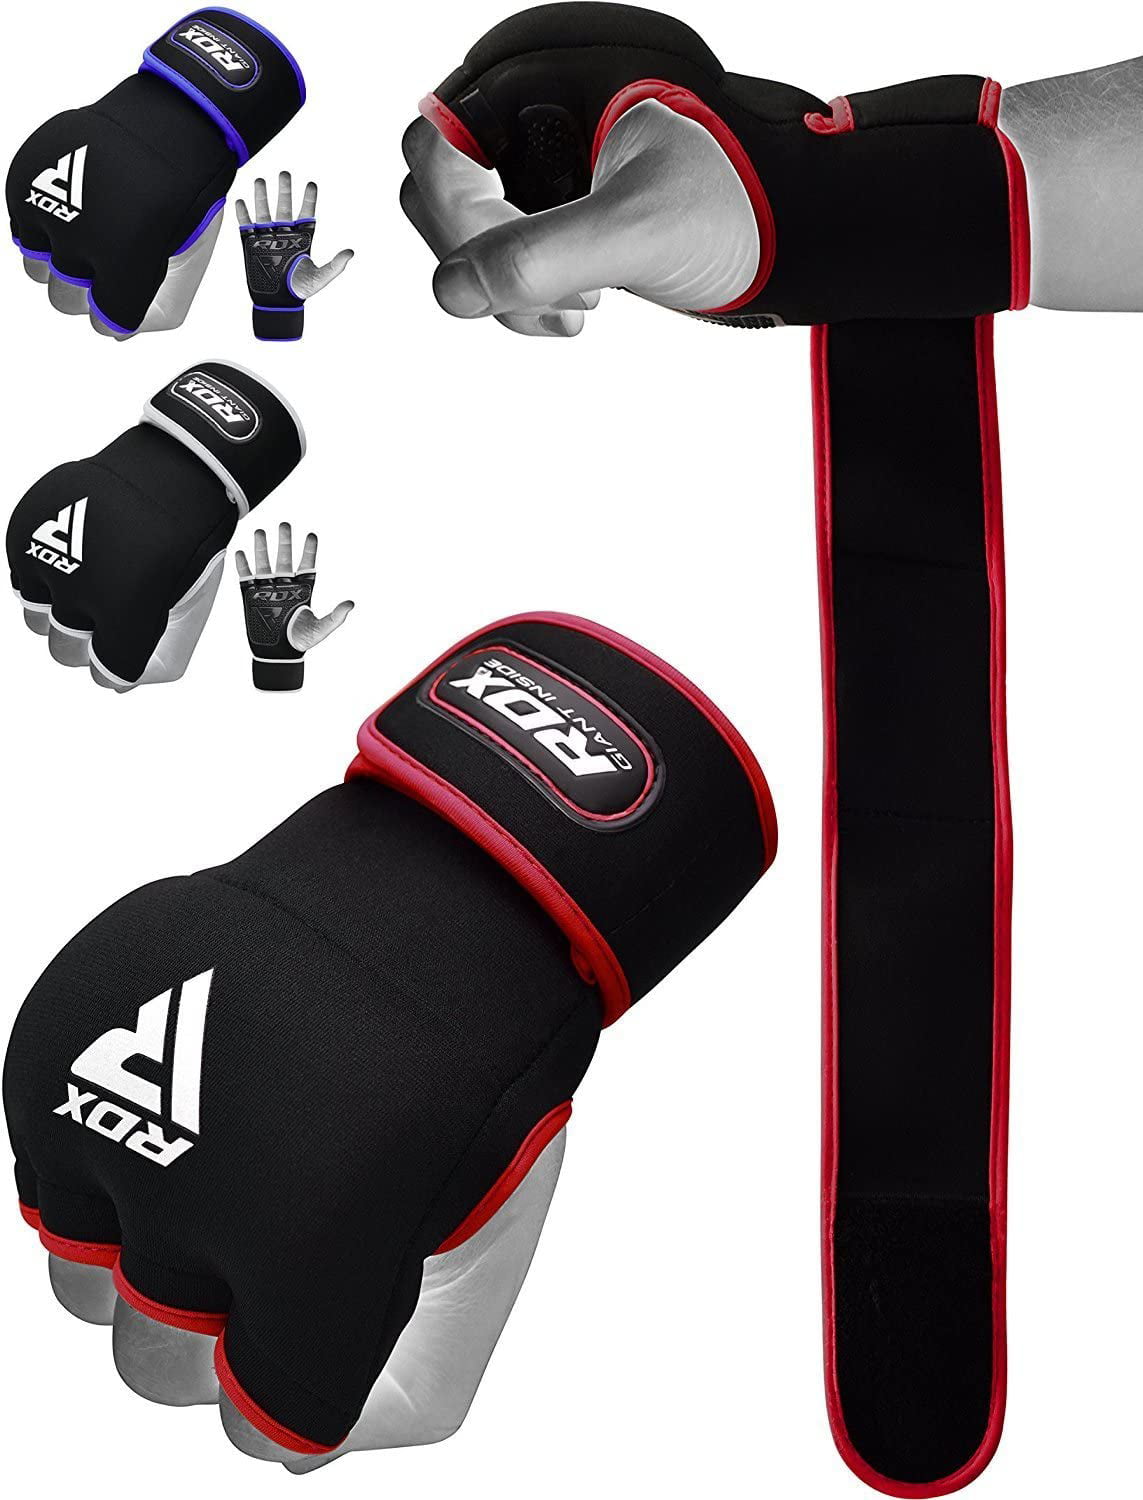 Boxing Fist Hand Inner Gloves Bandages MMA Muay Thai Punch Wraps Black S/M L/XL 